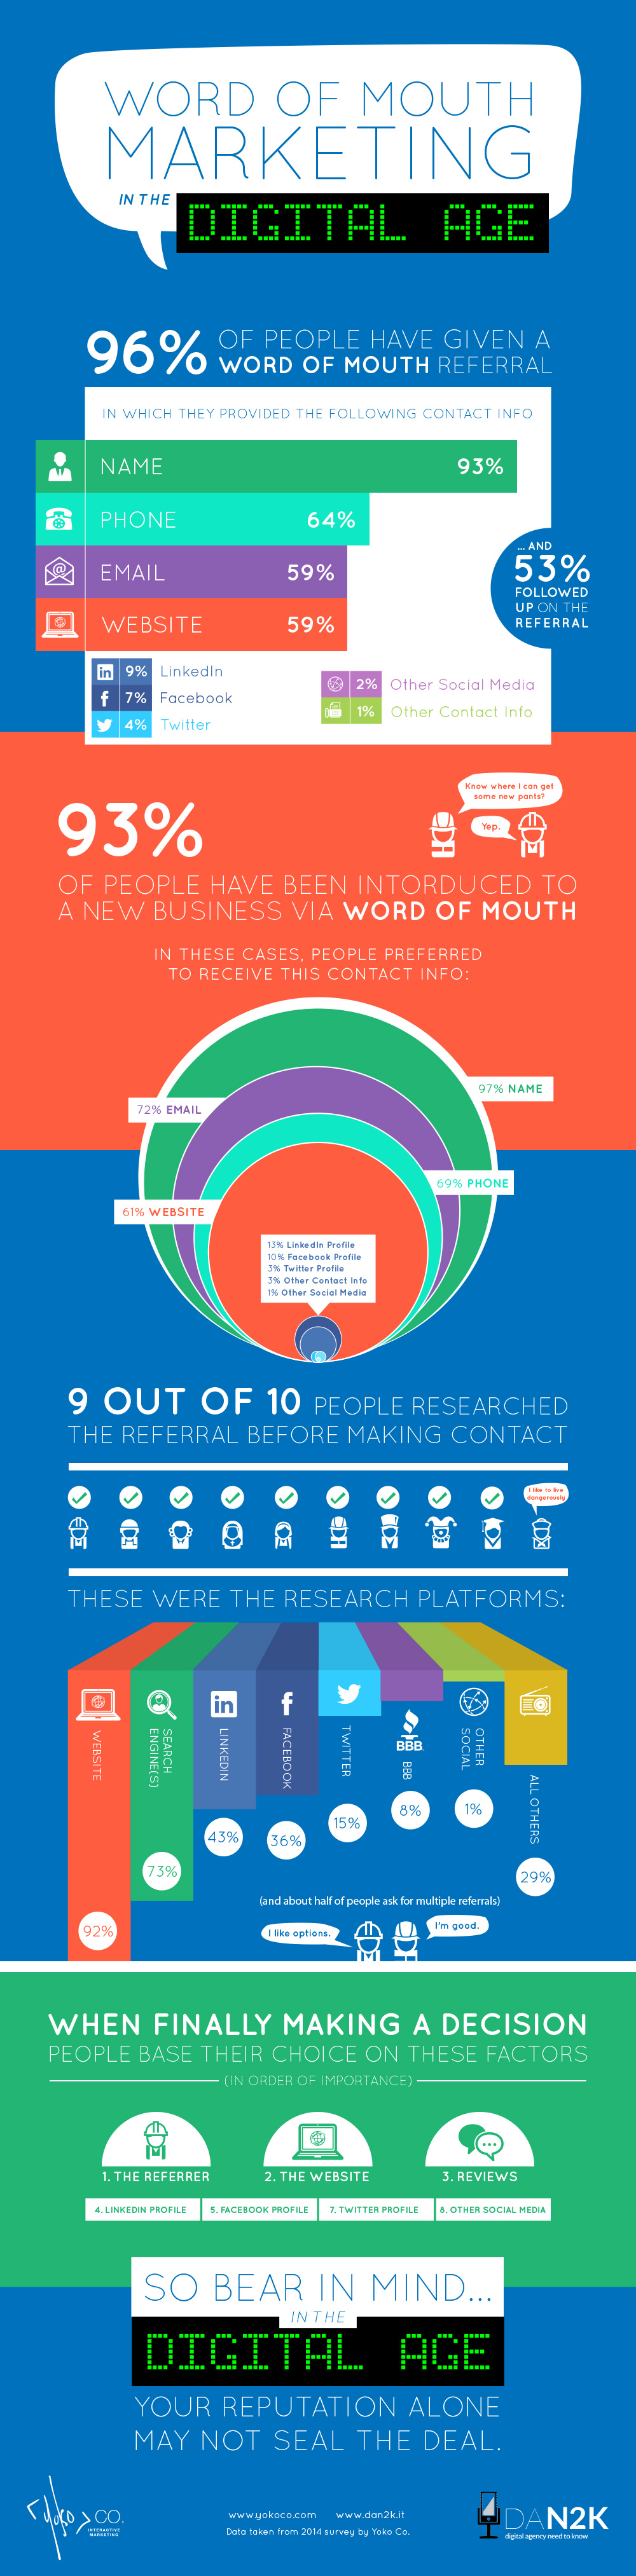 Word of Mouth Marketing Survey Results Infographic by Yoko Co